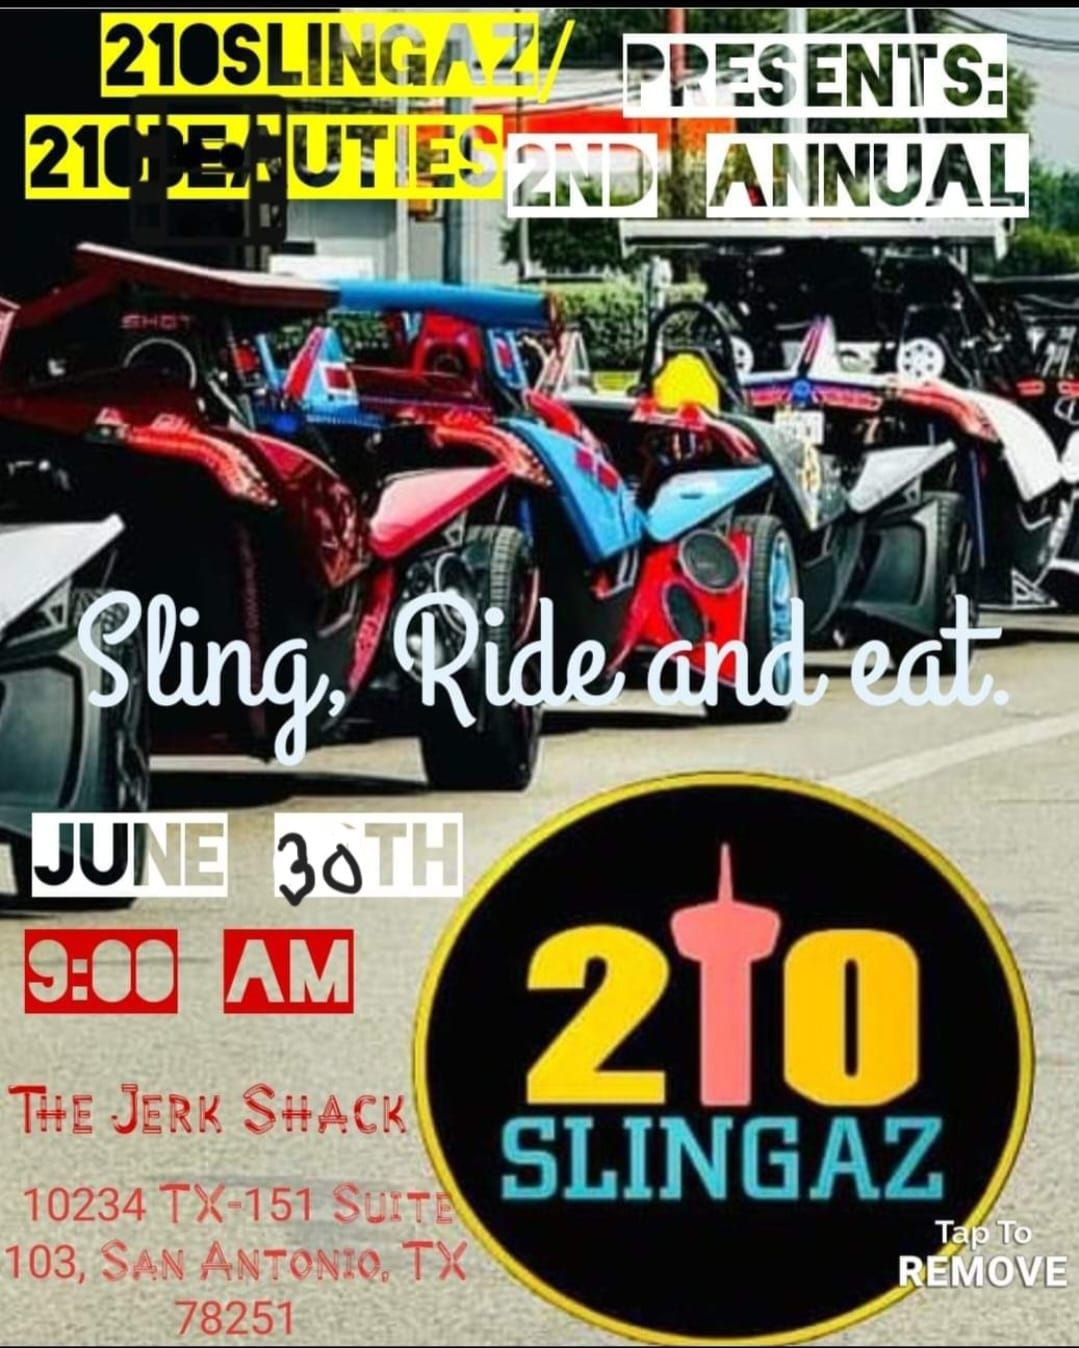 210Slingaz\/210beauties 2nd Annual Sling, Ride and Eat Event